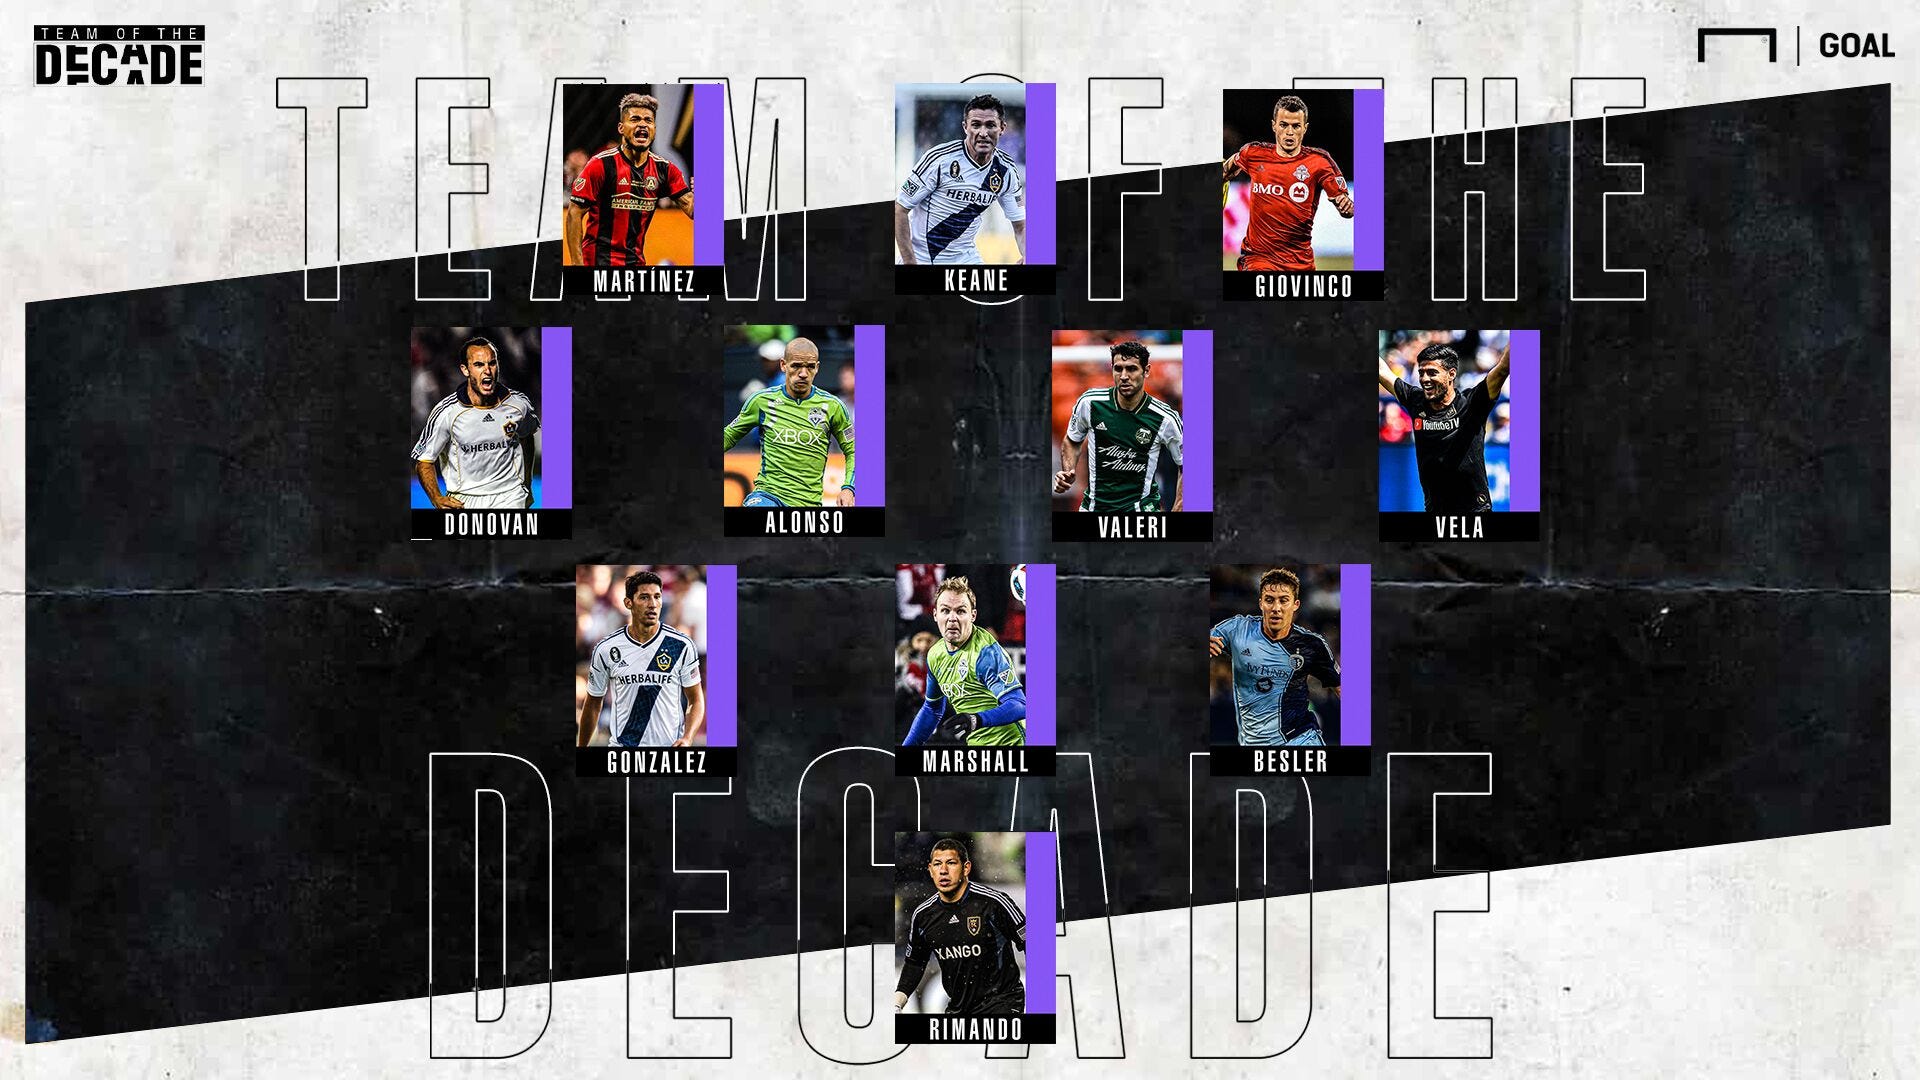 MLS Team of the Decade